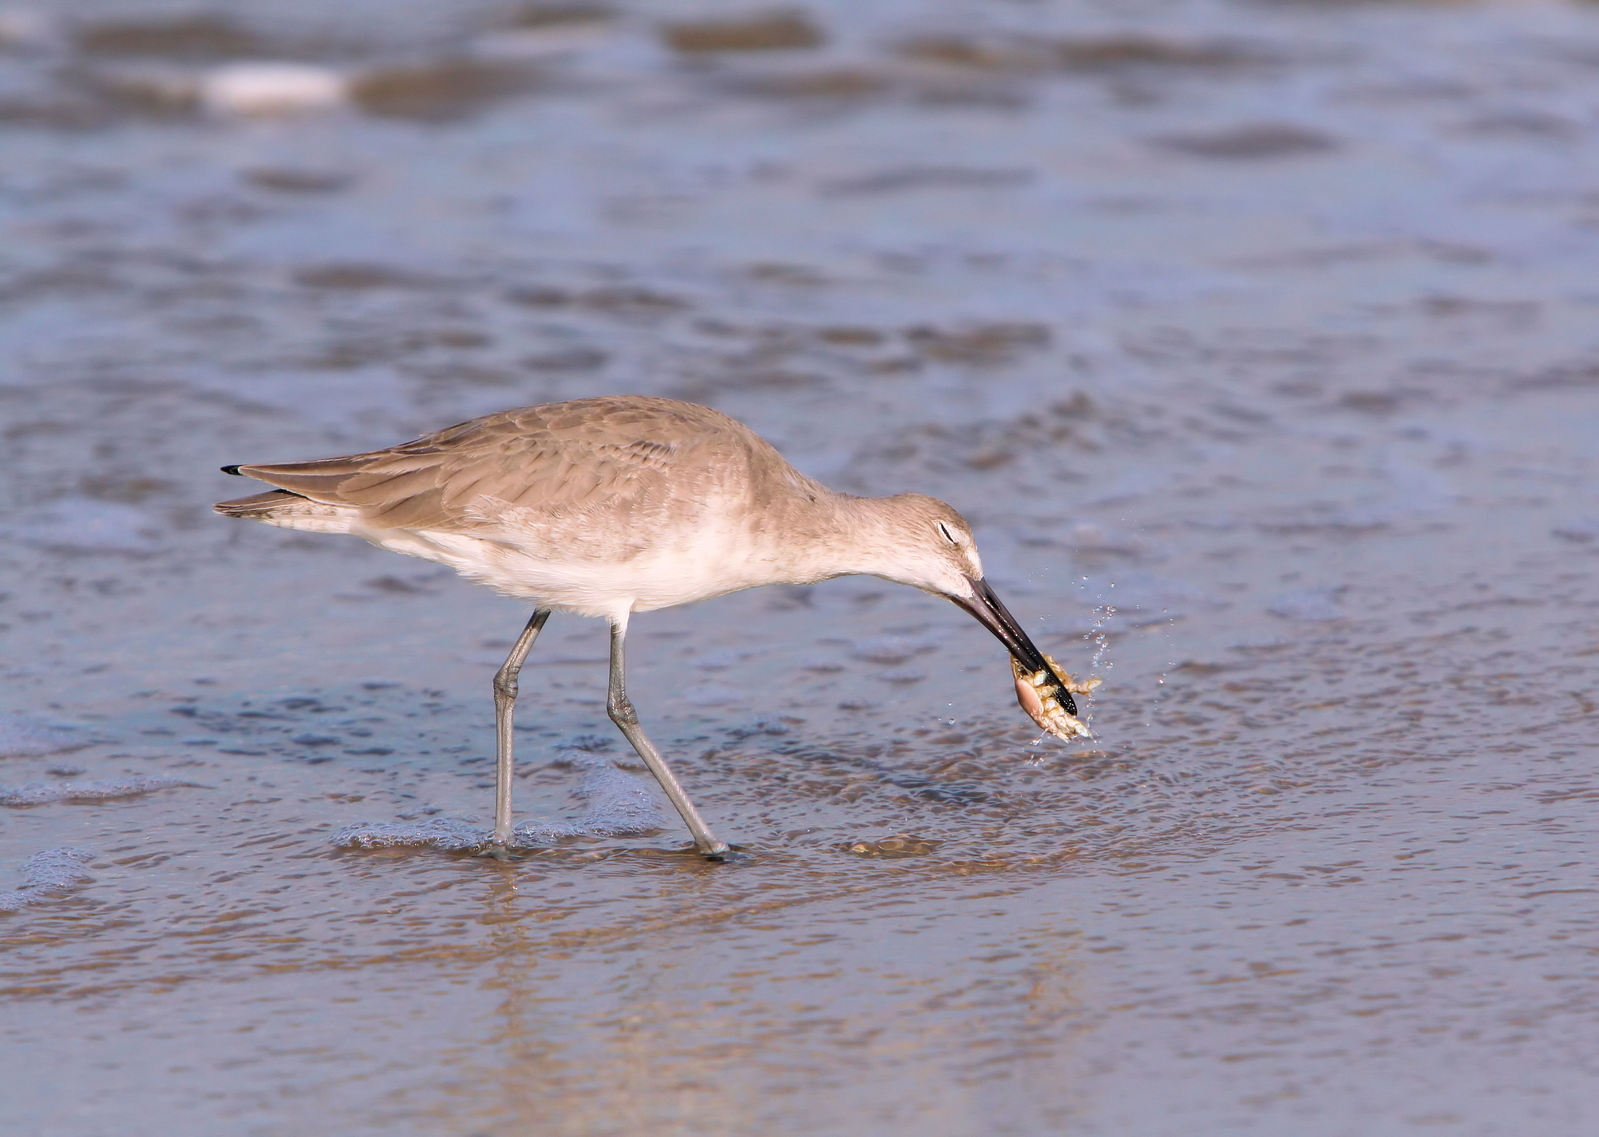 a sand piper picks up food on the beach